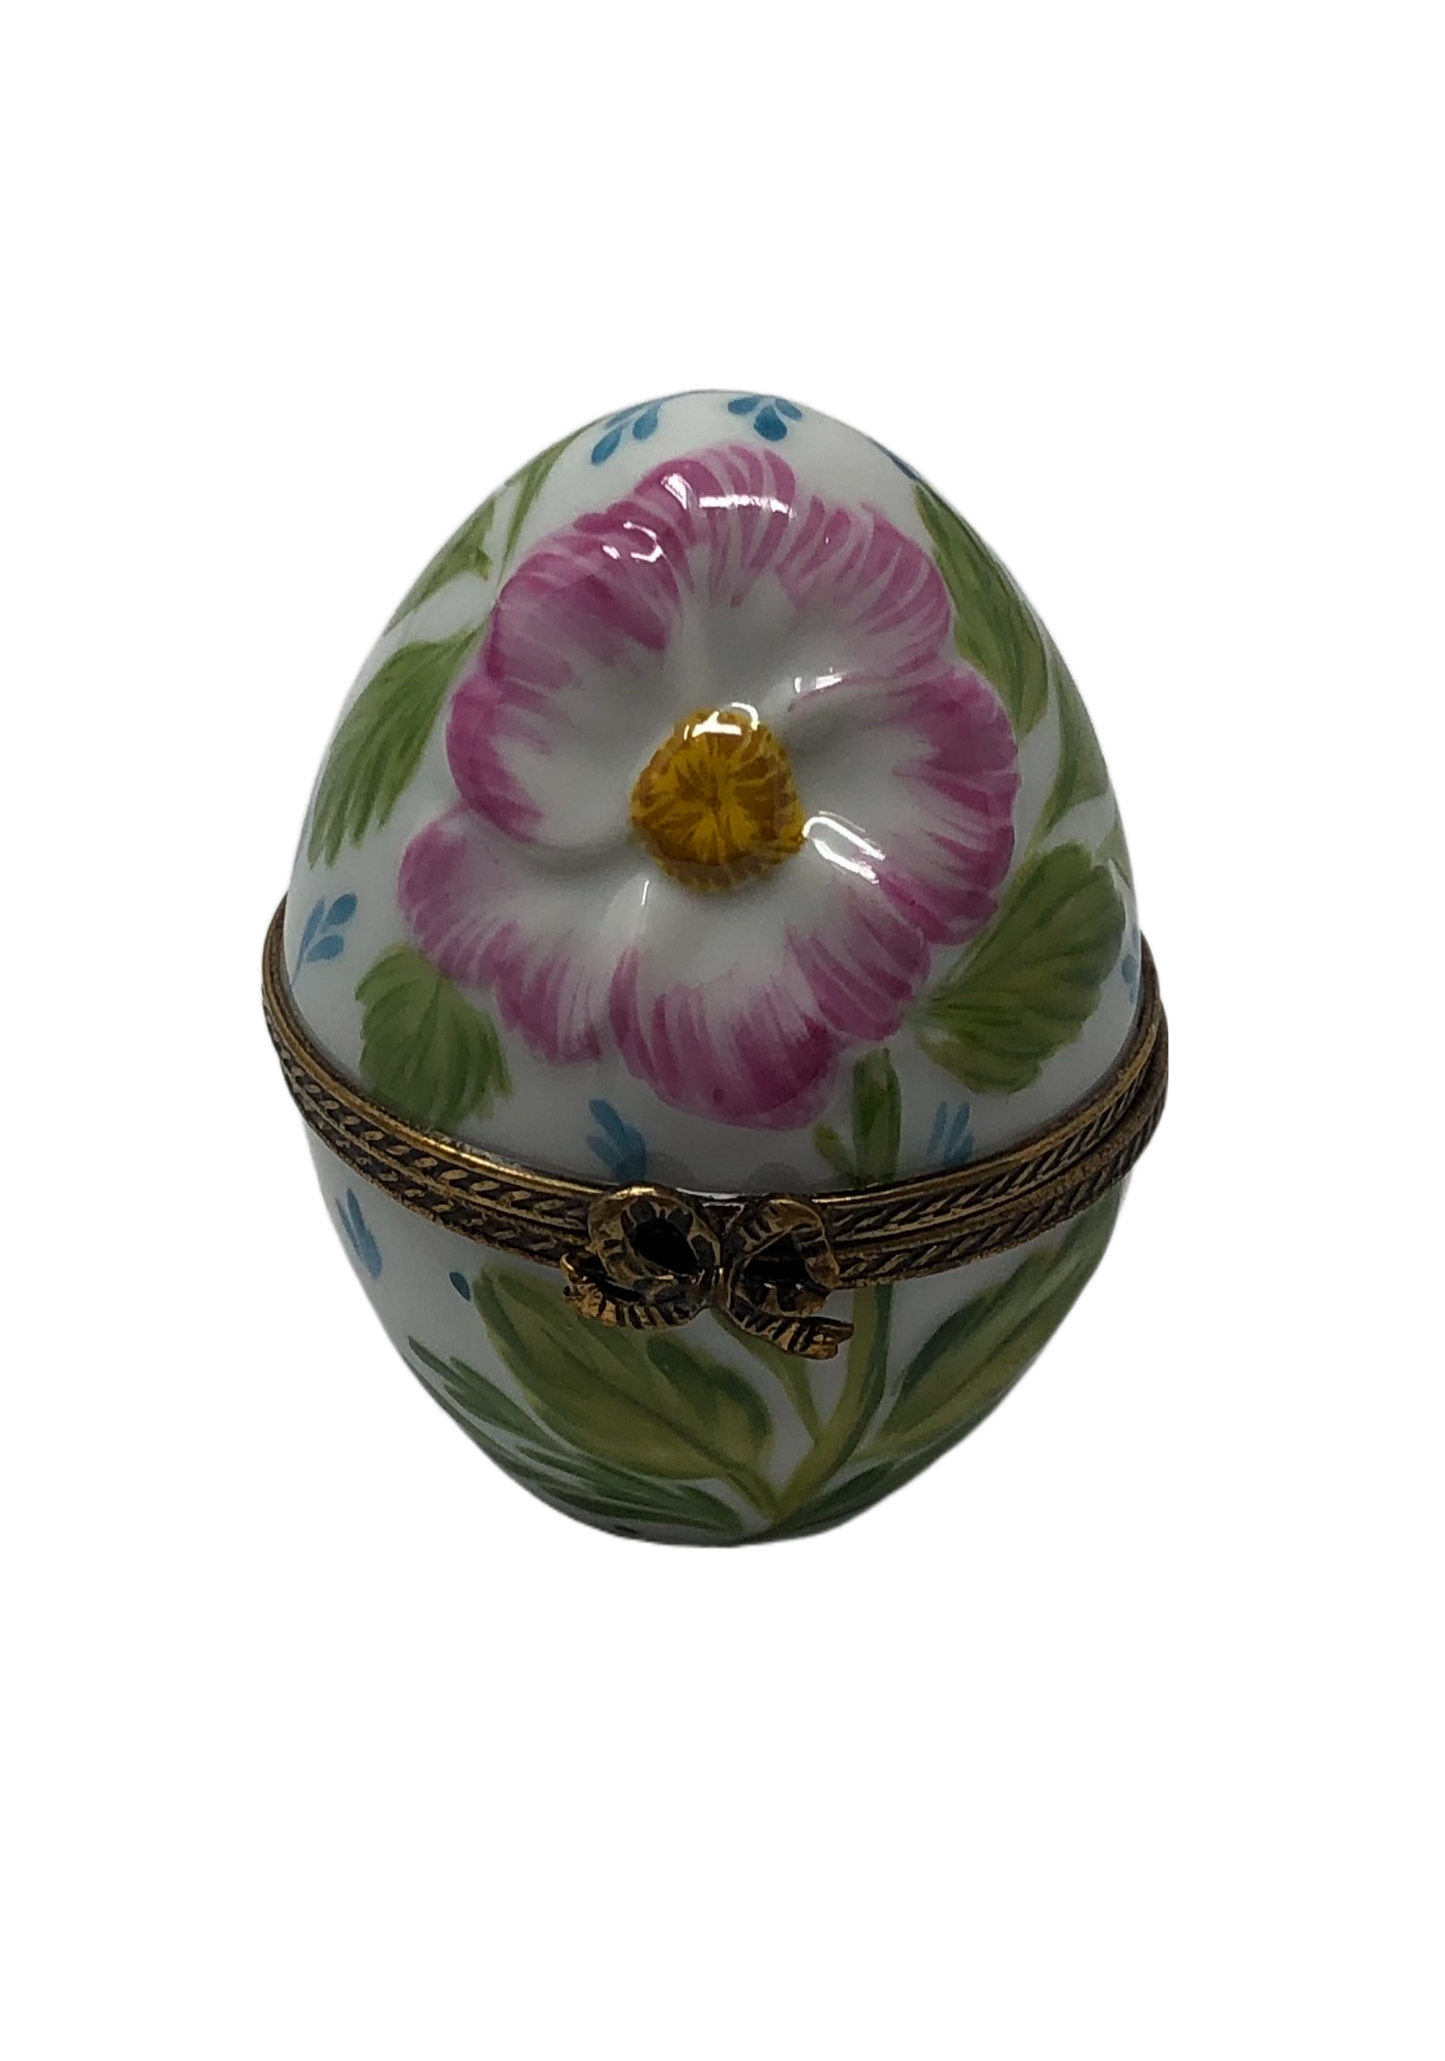 Blooming Elegance - Limoges Box with White Egg, Green Leaves, and Pink Flower